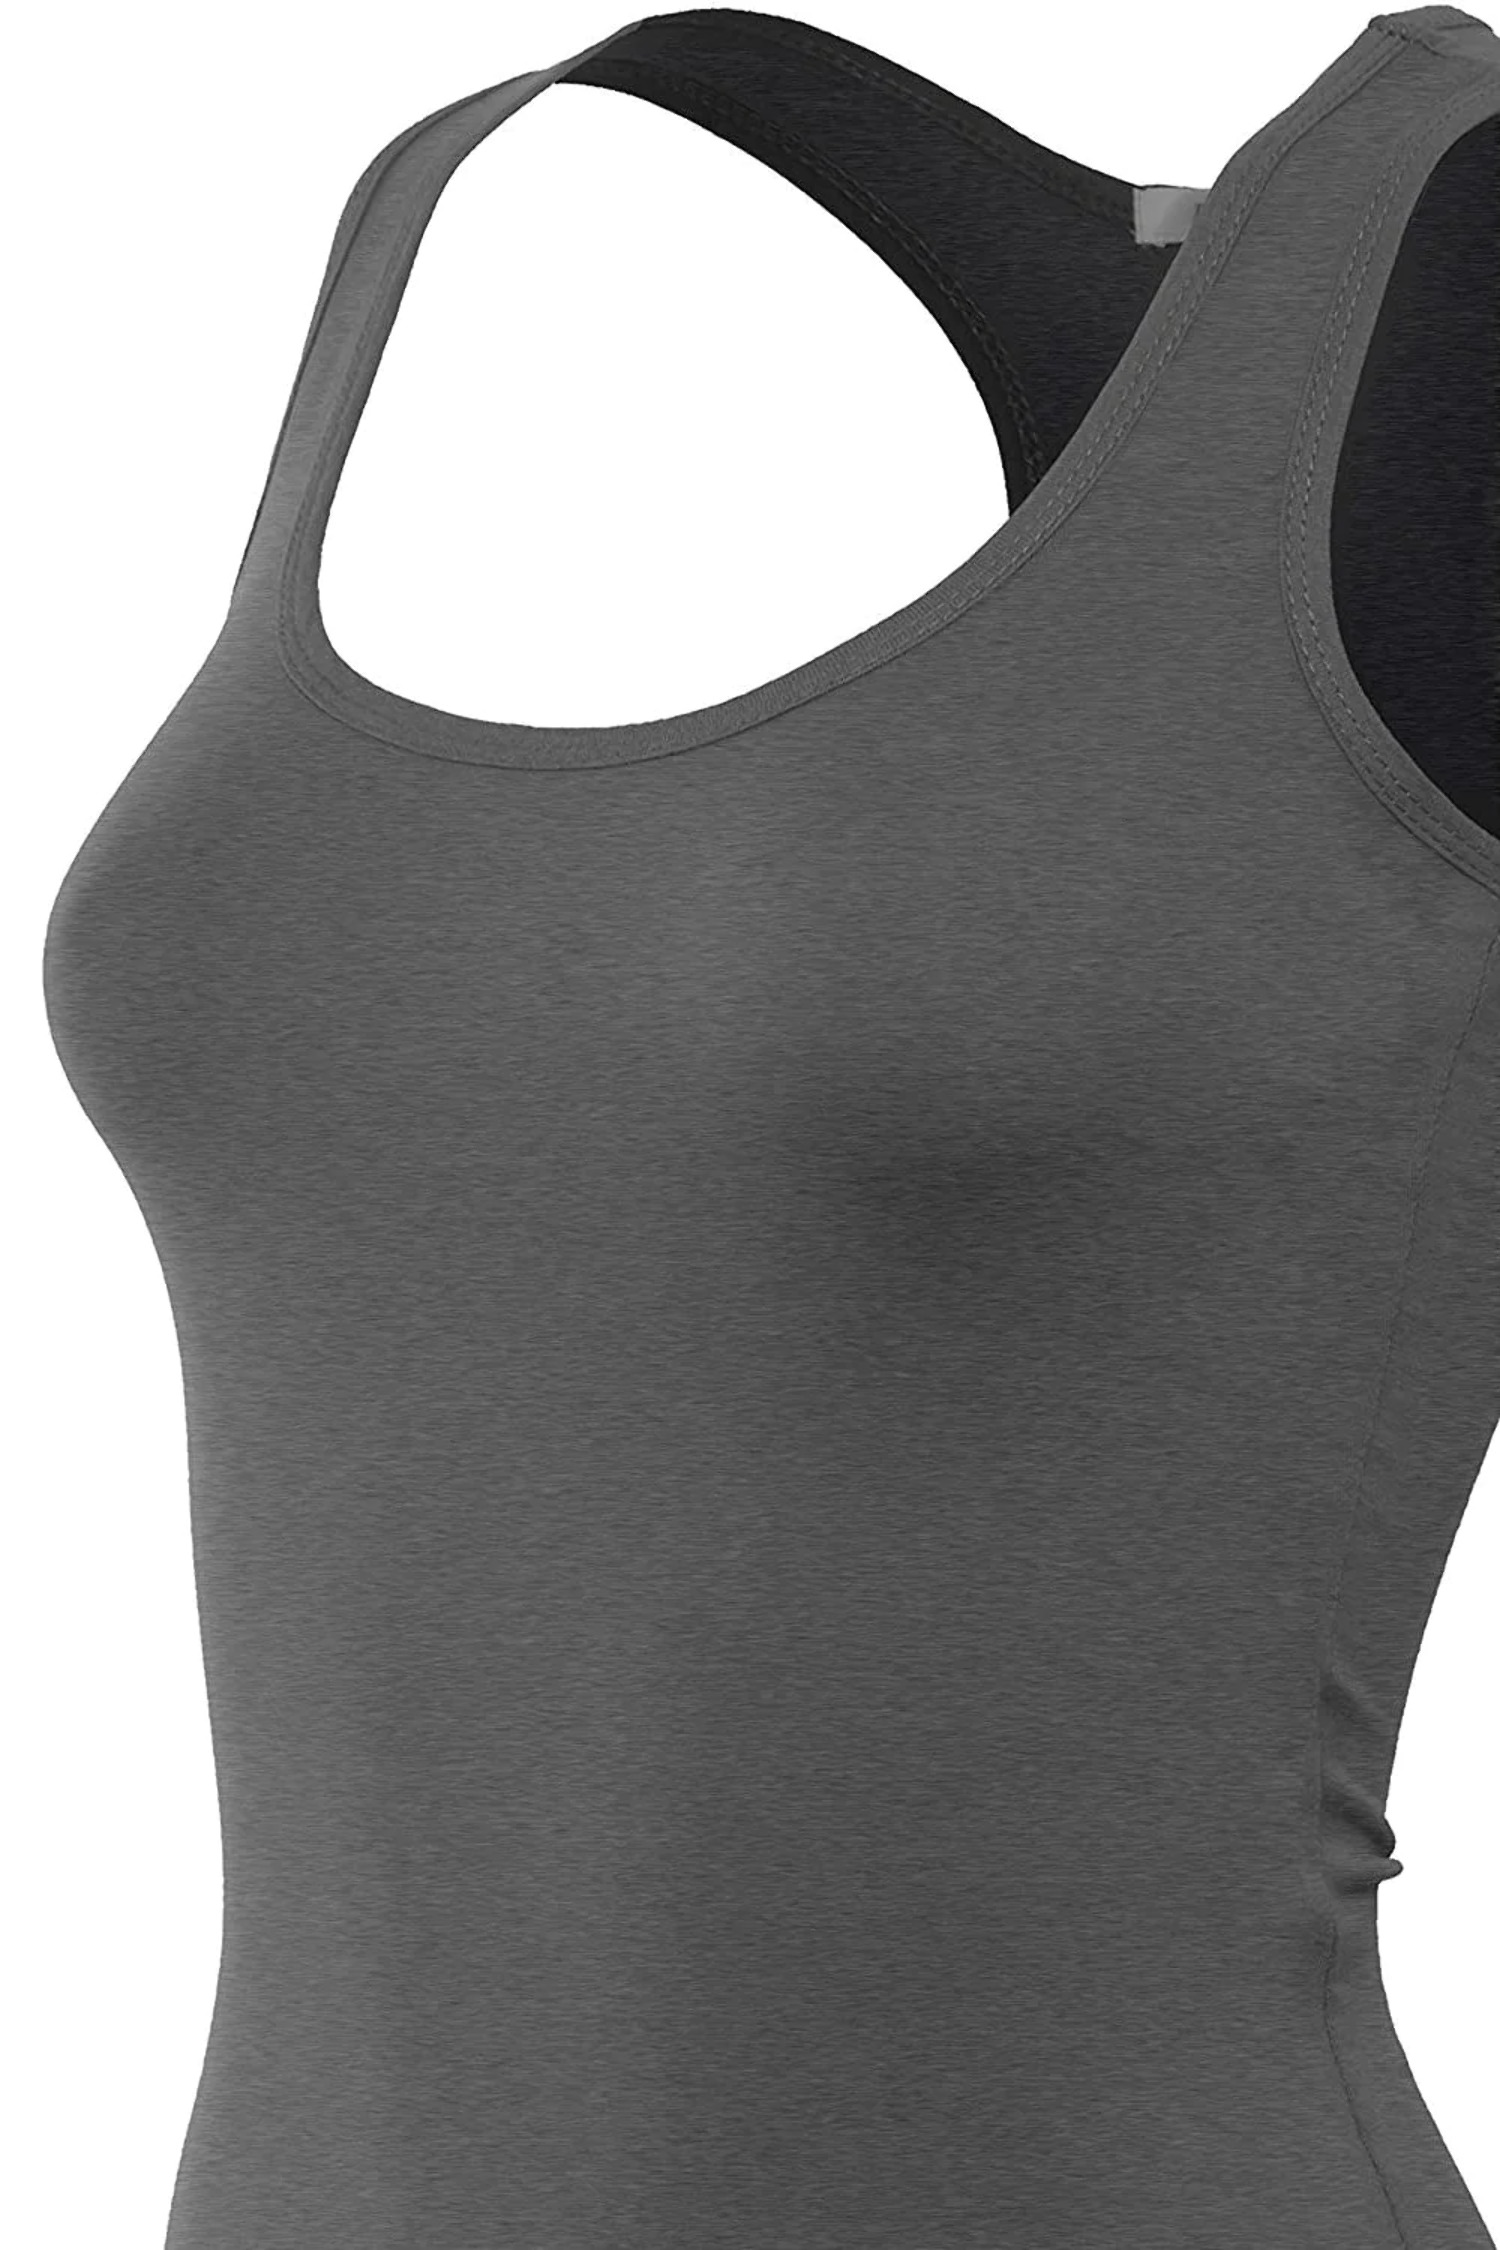 Bozzolo Women's Basic Cotton Spandex Racerback Solid Plain Fitted Tank Top -RT1777 - image 3 of 11